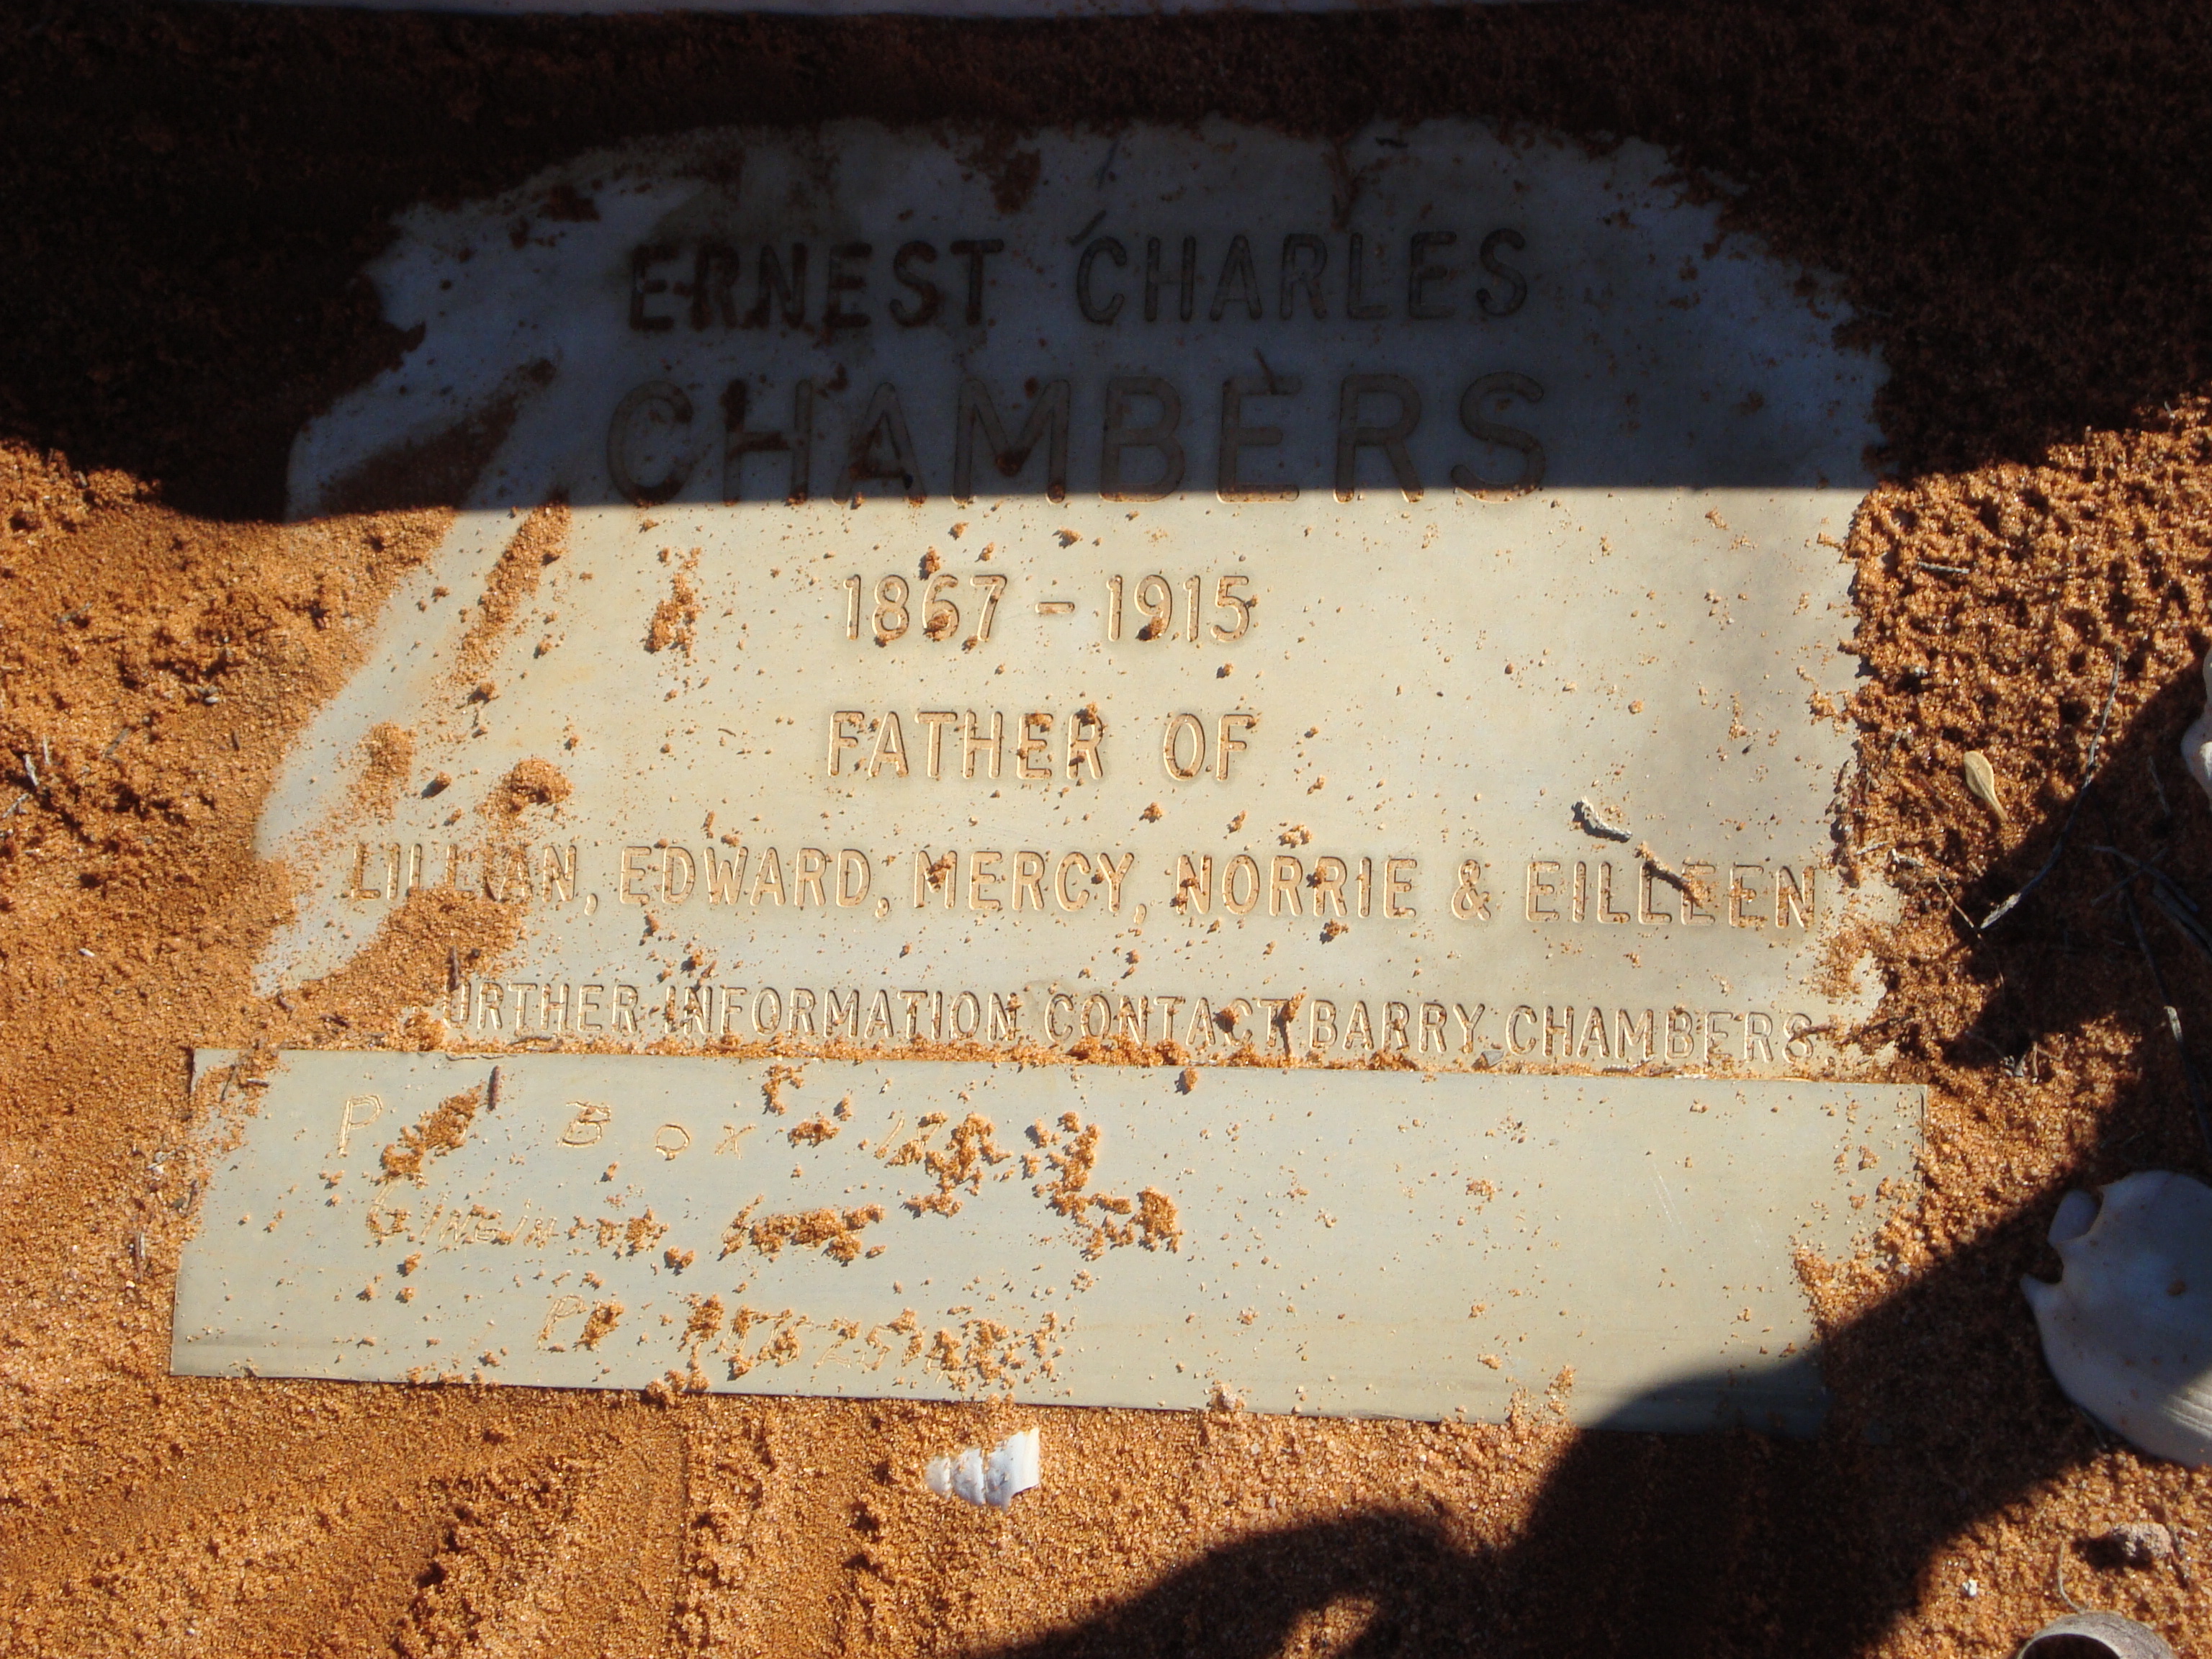 Photograph of the memorial plaque on the grave of Ernest Charles Chambers, Comet Vale